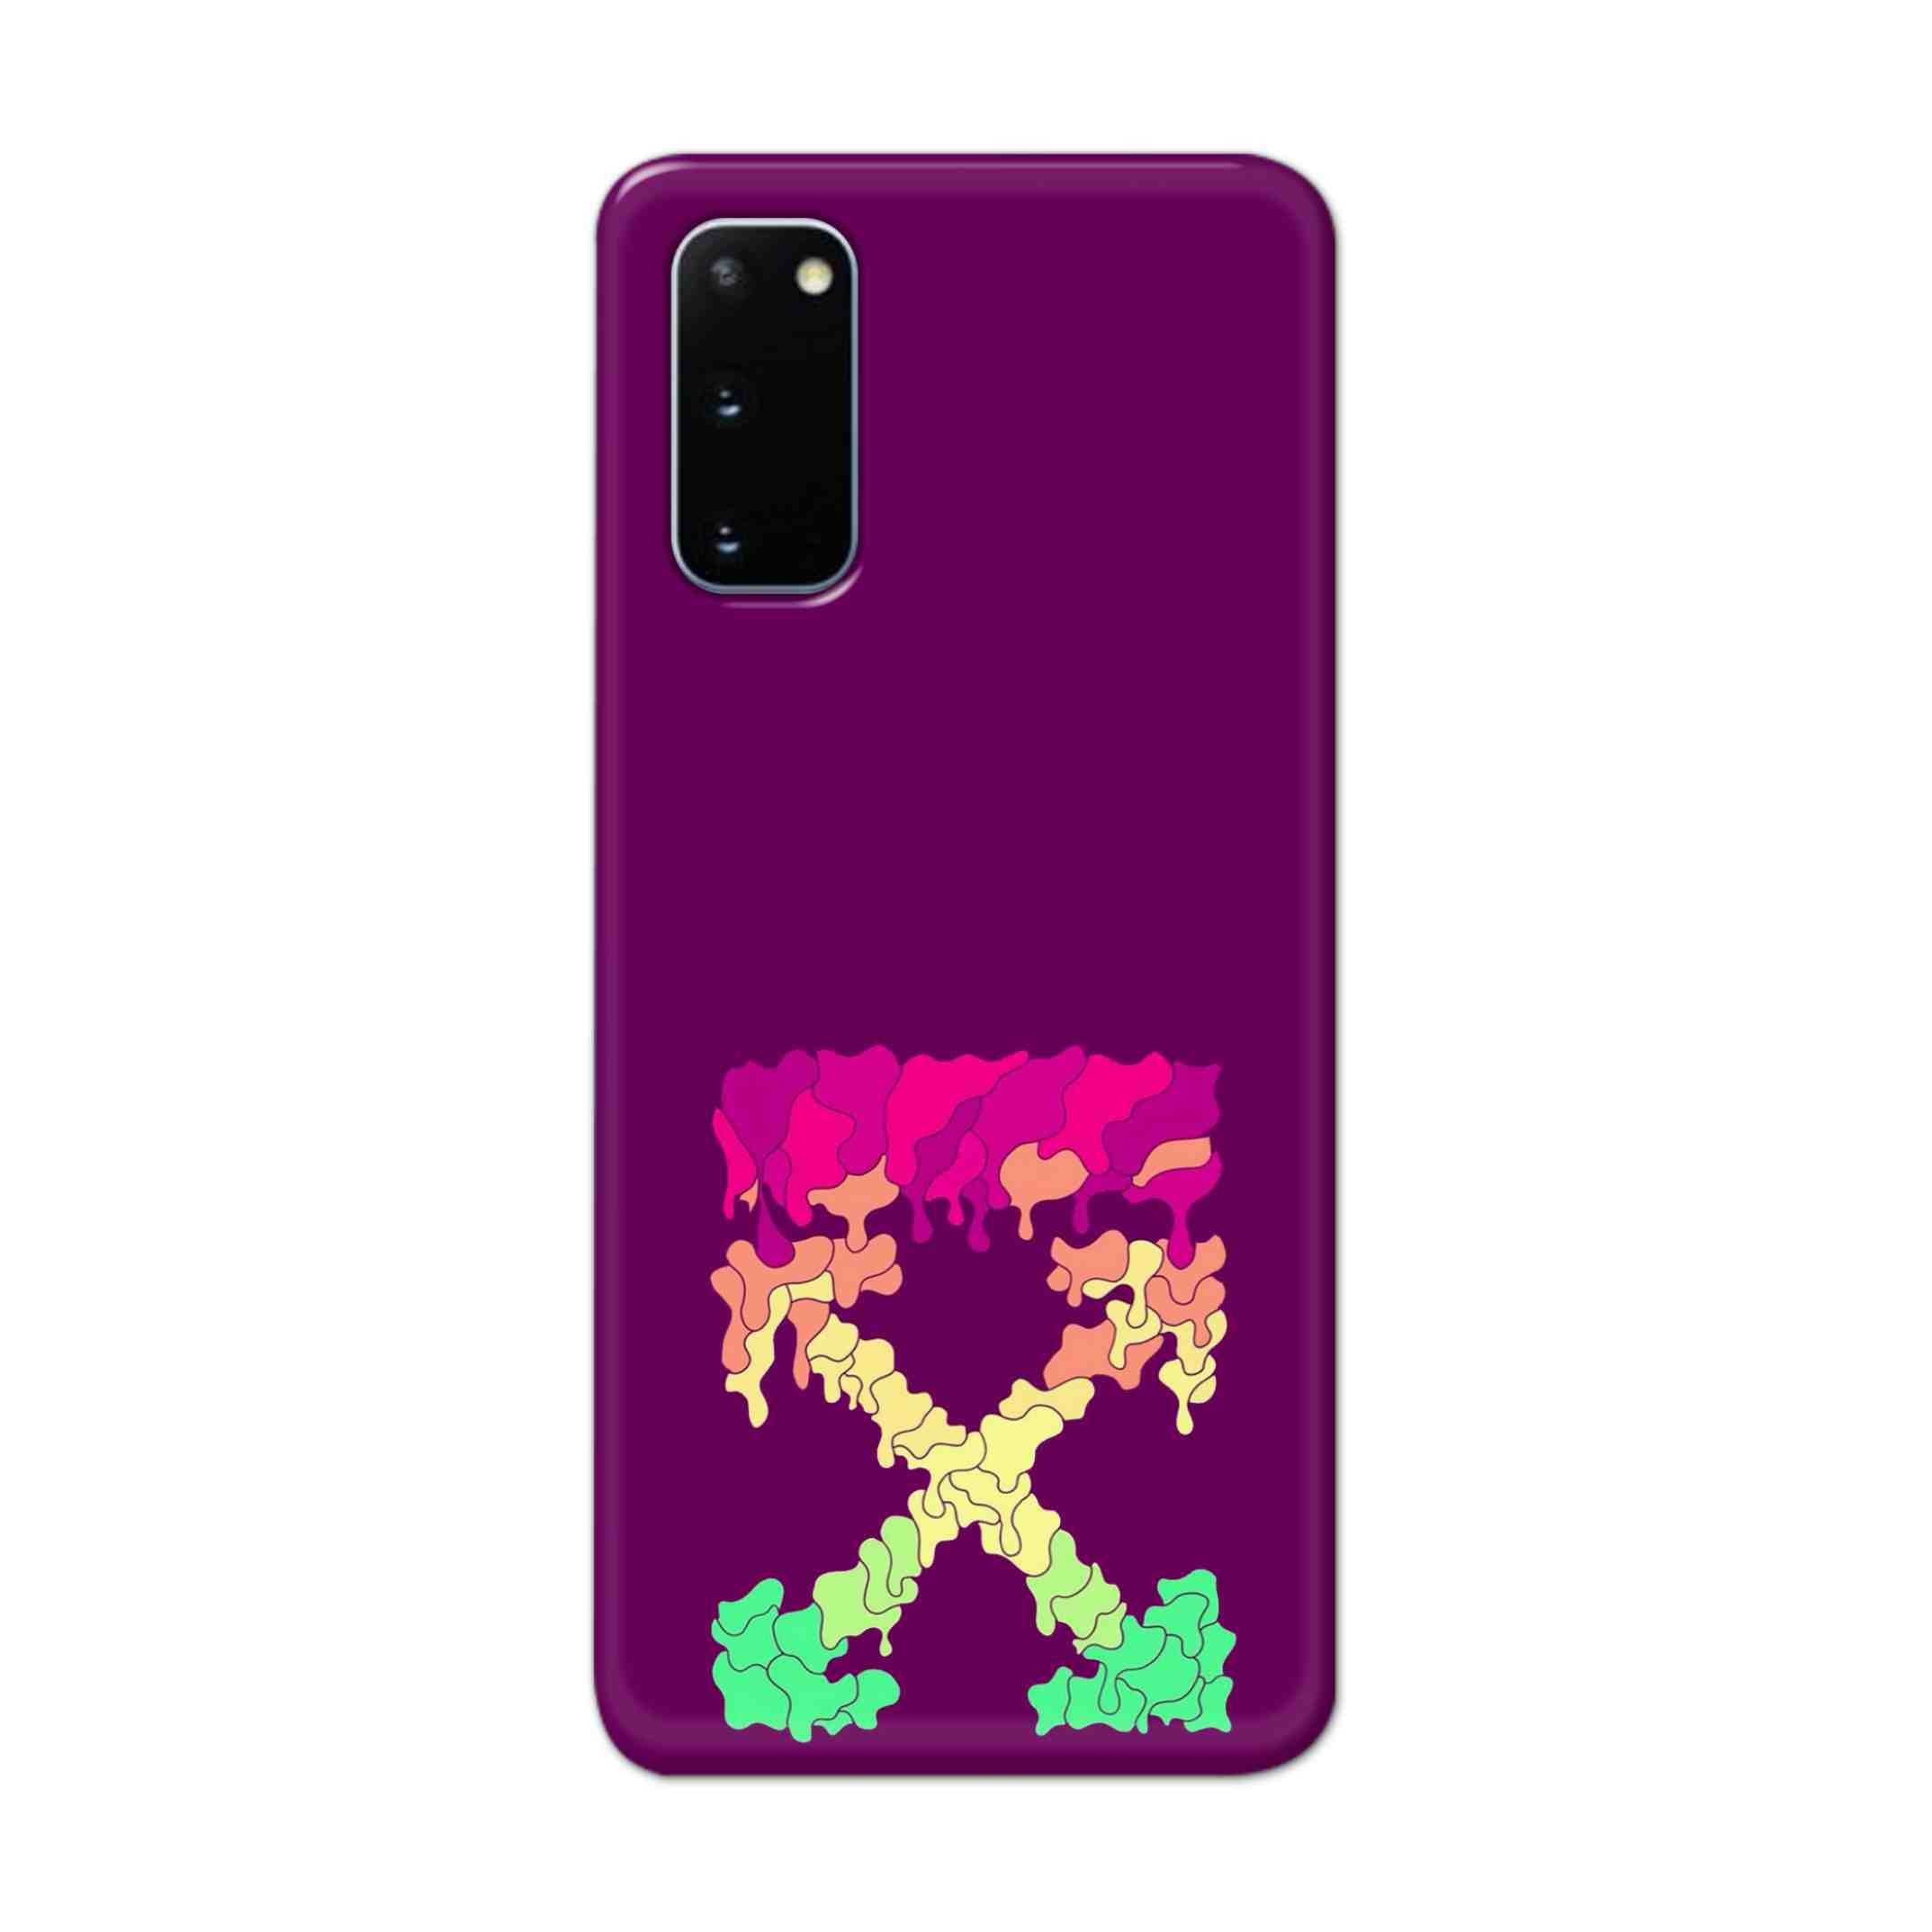 Buy X.O Hard Back Mobile Phone Case Cover For Samsung Galaxy S20 Online